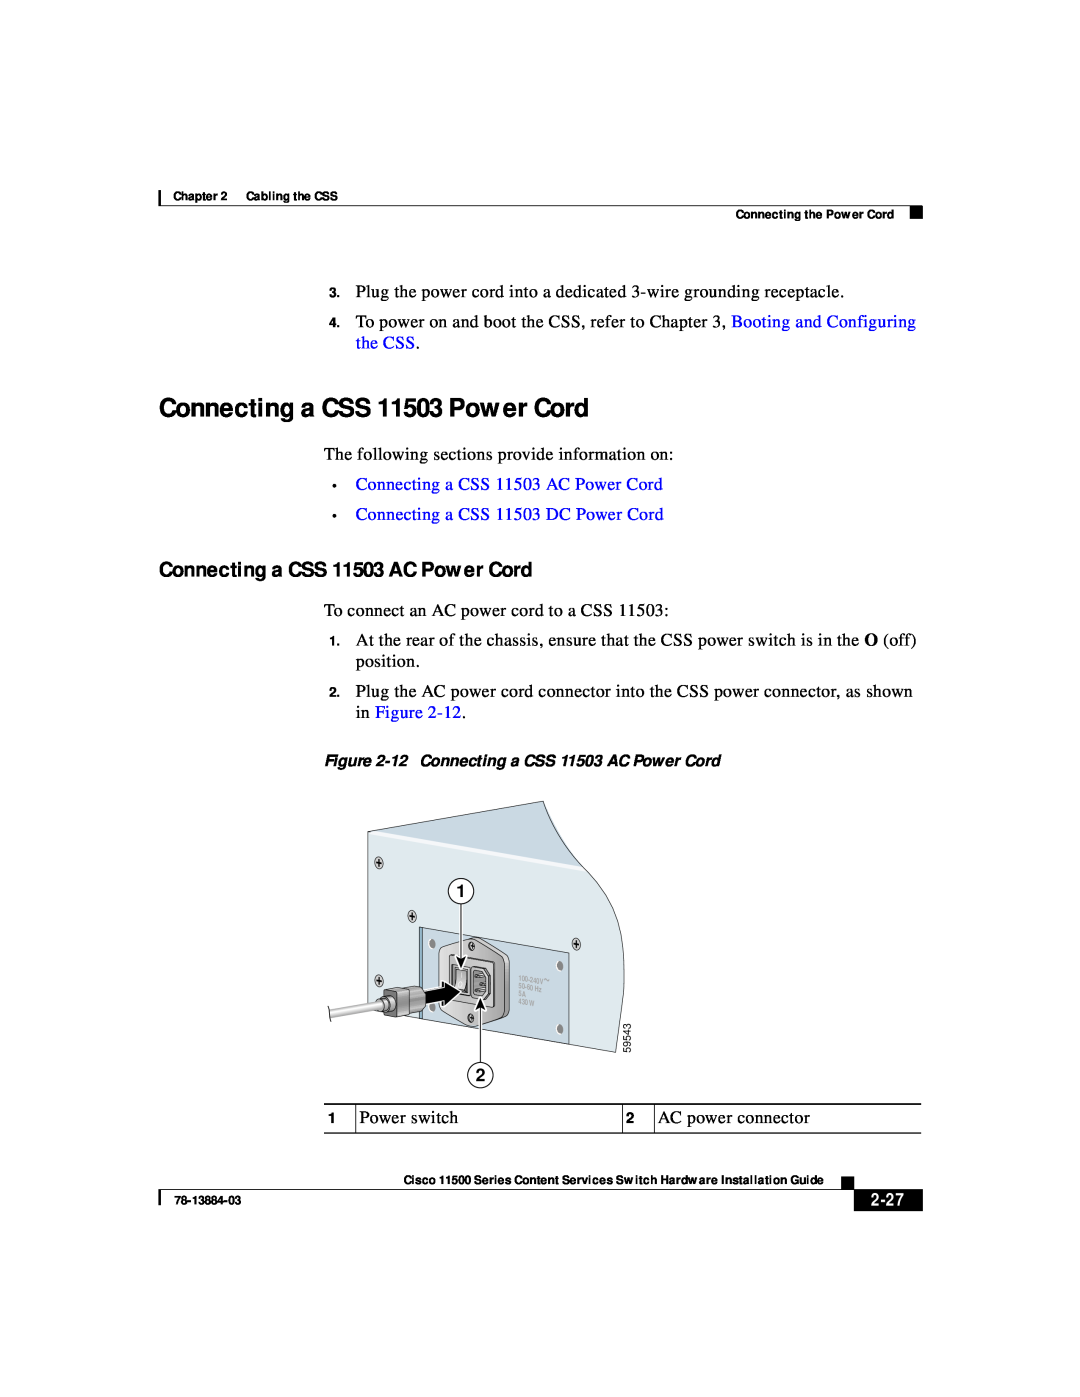 Cisco Systems 11500 Series manual Connecting a CSS 11503 Power Cord, Connecting a CSS 11503 AC Power Cord, 2-27 